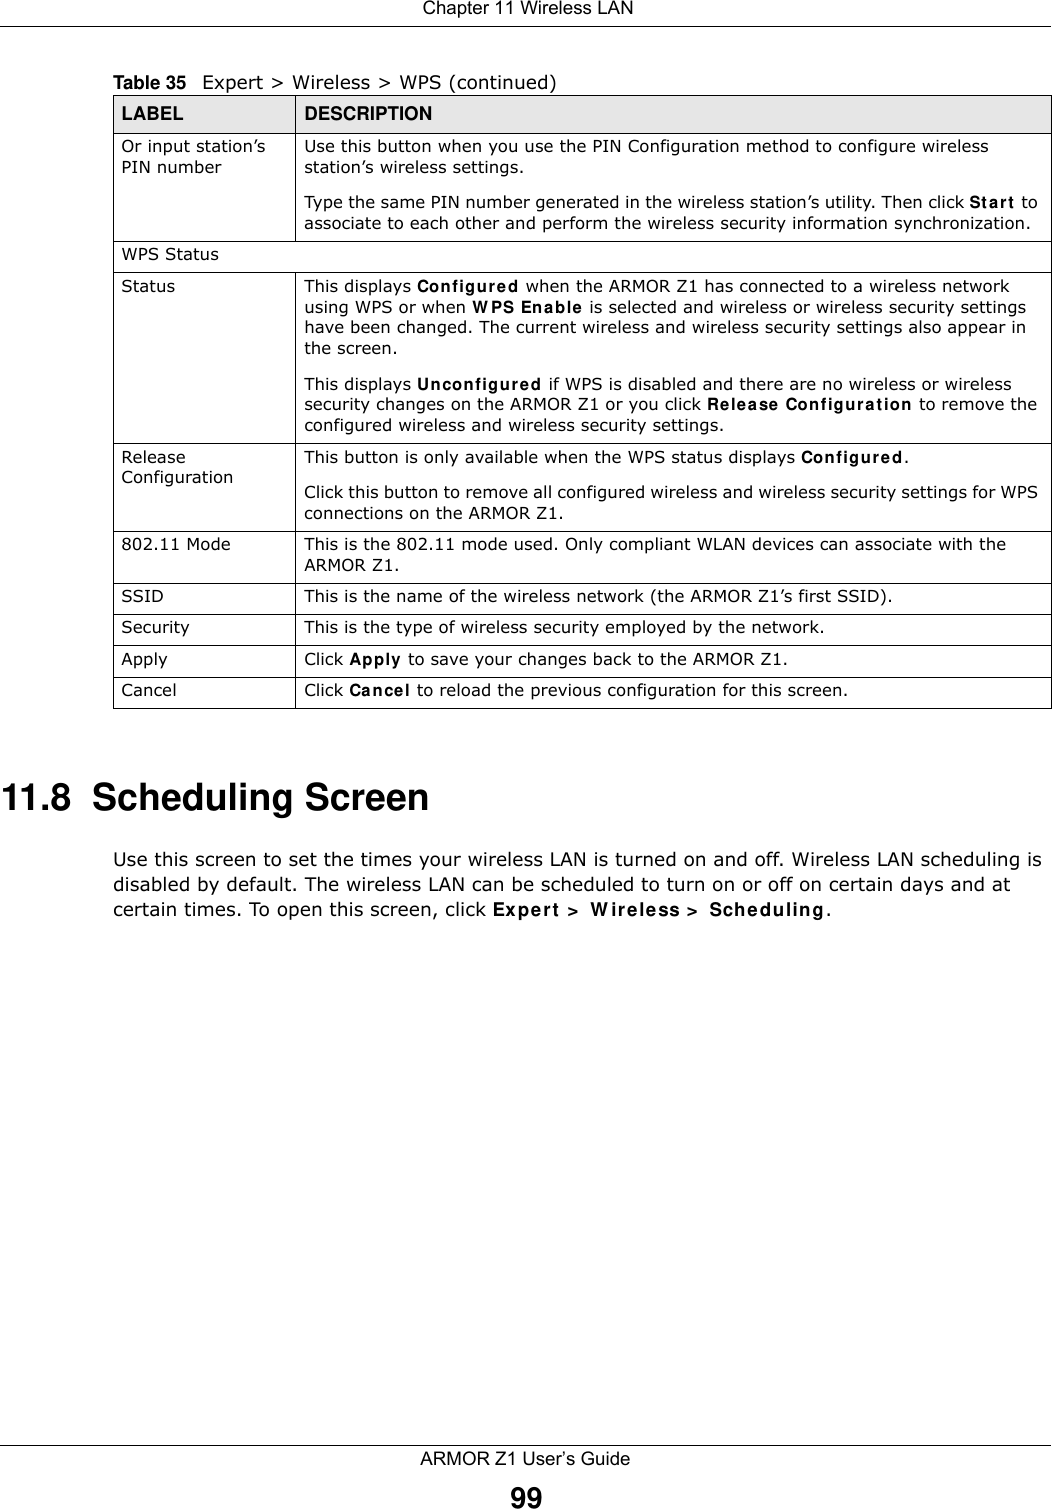  Chapter 11 Wireless LANARMOR Z1 User’s Guide9911.8  Scheduling ScreenUse this screen to set the times your wireless LAN is turned on and off. Wireless LAN scheduling is disabled by default. The wireless LAN can be scheduled to turn on or off on certain days and at certain times. To open this screen, click Expert &gt; Wireless &gt; Scheduling.Or input station’s PIN numberUse this button when you use the PIN Configuration method to configure wireless station’s wireless settings. Type the same PIN number generated in the wireless station’s utility. Then click Start to associate to each other and perform the wireless security information synchronization. WPS StatusStatus This displays Configured when the ARMOR Z1 has connected to a wireless network using WPS or when WPS Enable is selected and wireless or wireless security settings have been changed. The current wireless and wireless security settings also appear in the screen.This displays Unconfigured if WPS is disabled and there are no wireless or wireless security changes on the ARMOR Z1 or you click Release Configuration to remove the configured wireless and wireless security settings.Release ConfigurationThis button is only available when the WPS status displays Configured.Click this button to remove all configured wireless and wireless security settings for WPS connections on the ARMOR Z1.802.11 Mode This is the 802.11 mode used. Only compliant WLAN devices can associate with the ARMOR Z1.SSID This is the name of the wireless network (the ARMOR Z1’s first SSID).Security This is the type of wireless security employed by the network.Apply Click Apply to save your changes back to the ARMOR Z1.Cancel Click Cancel to reload the previous configuration for this screen.Table 35   Expert &gt; Wireless &gt; WPS (continued)LABEL DESCRIPTION